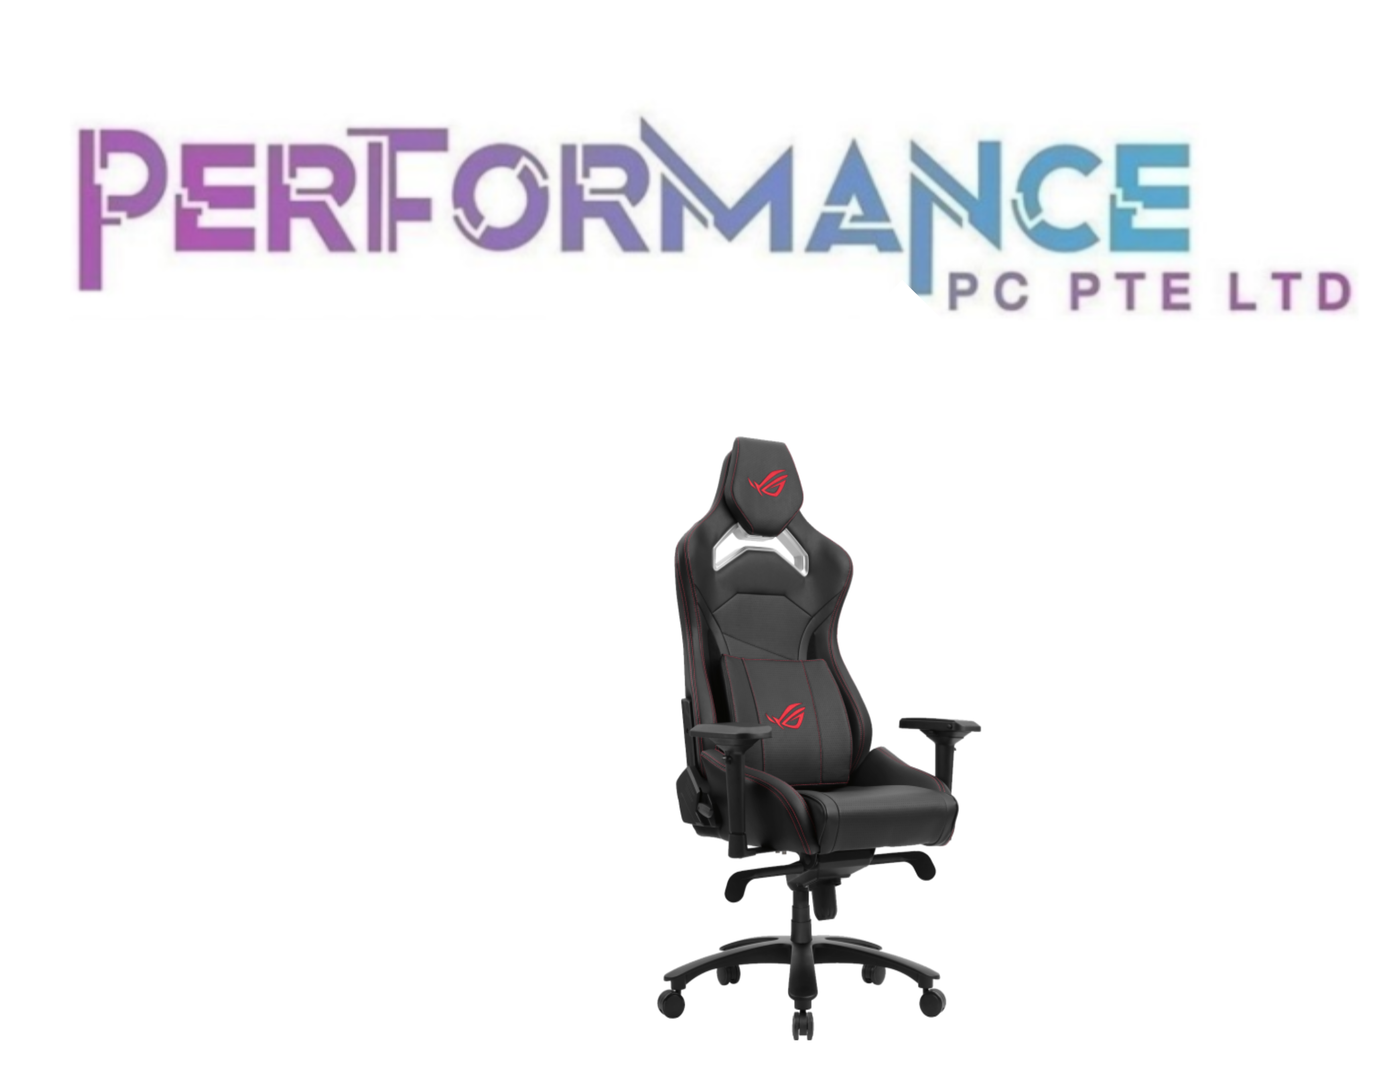 Asus ROG Chariot Core Gaming Chair SL300 (2 YEARS WARRANTY BY BAN LEONG TECHNOLOGIES PTE LTD)